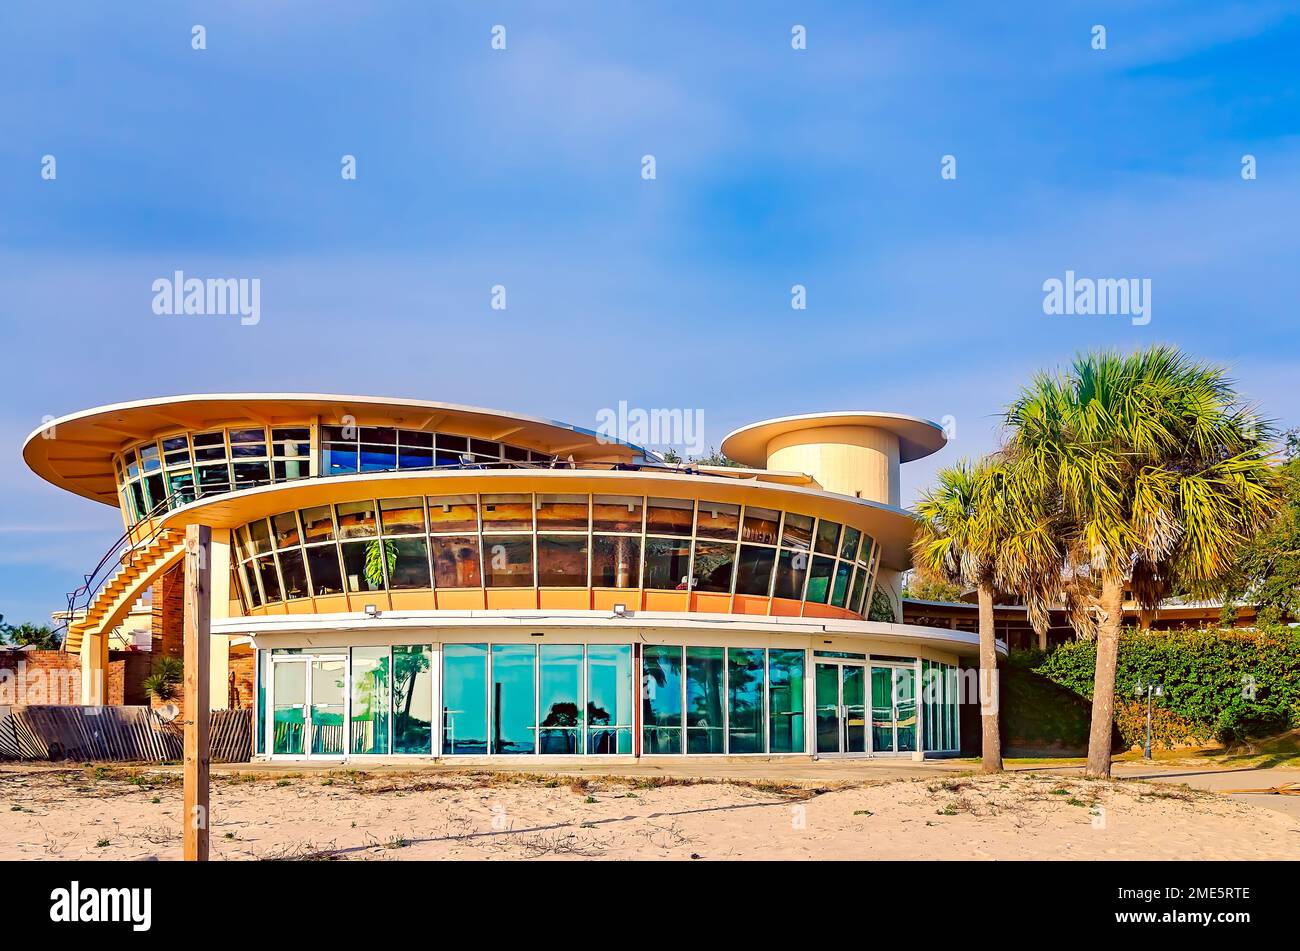 The Isle Dauphine Club is pictured, Jan. 19, 2023, in Dauphin Island, Alabama. The Isle Dauphine Club was built in 1957. Stock Photo